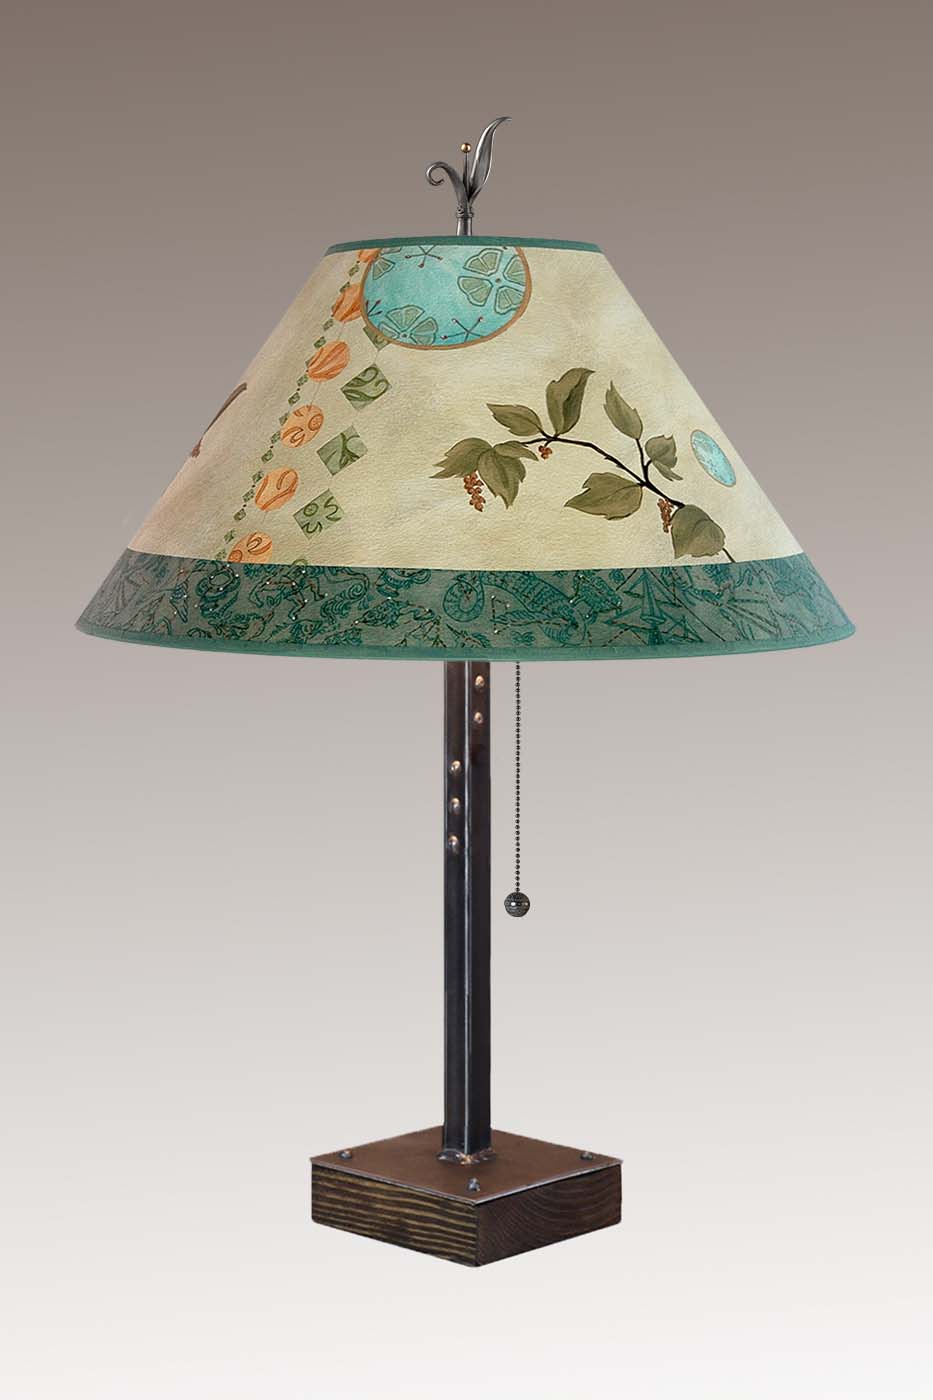 Janna Ugone &amp; Co Table Lamp Steel Table Lamp on Wood with Large Conical Shade in Celestial Leaf